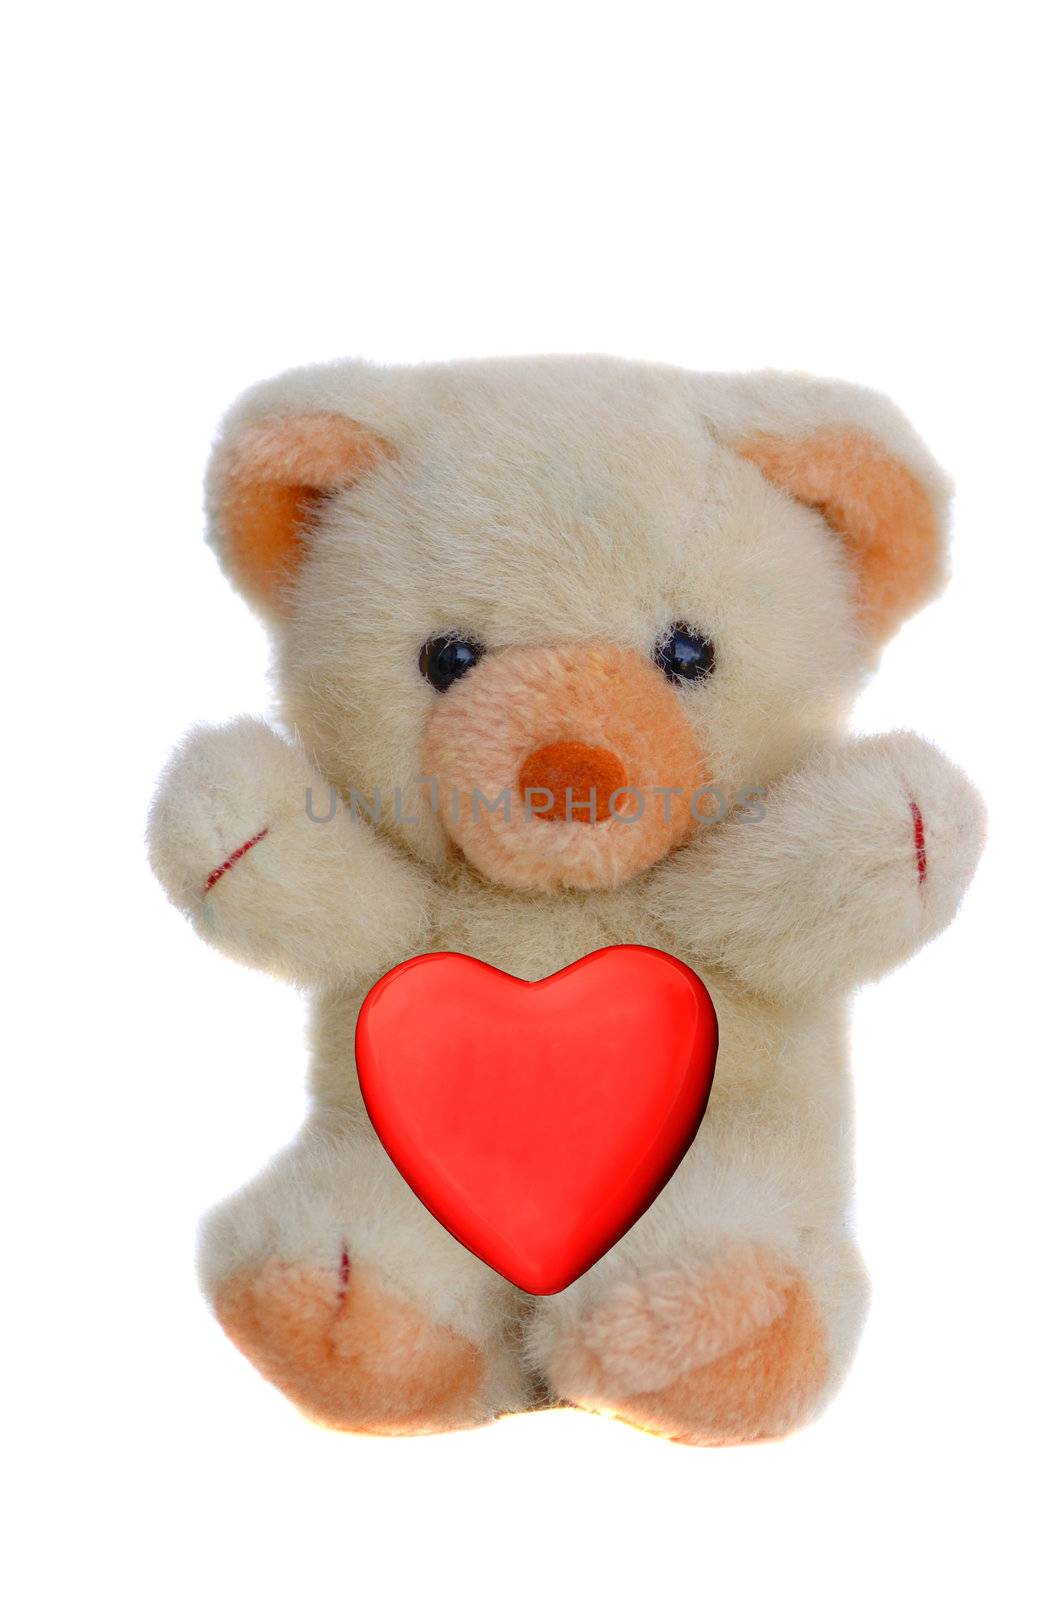 A beautiful teddy bear with red heart a symbol of peace and love 